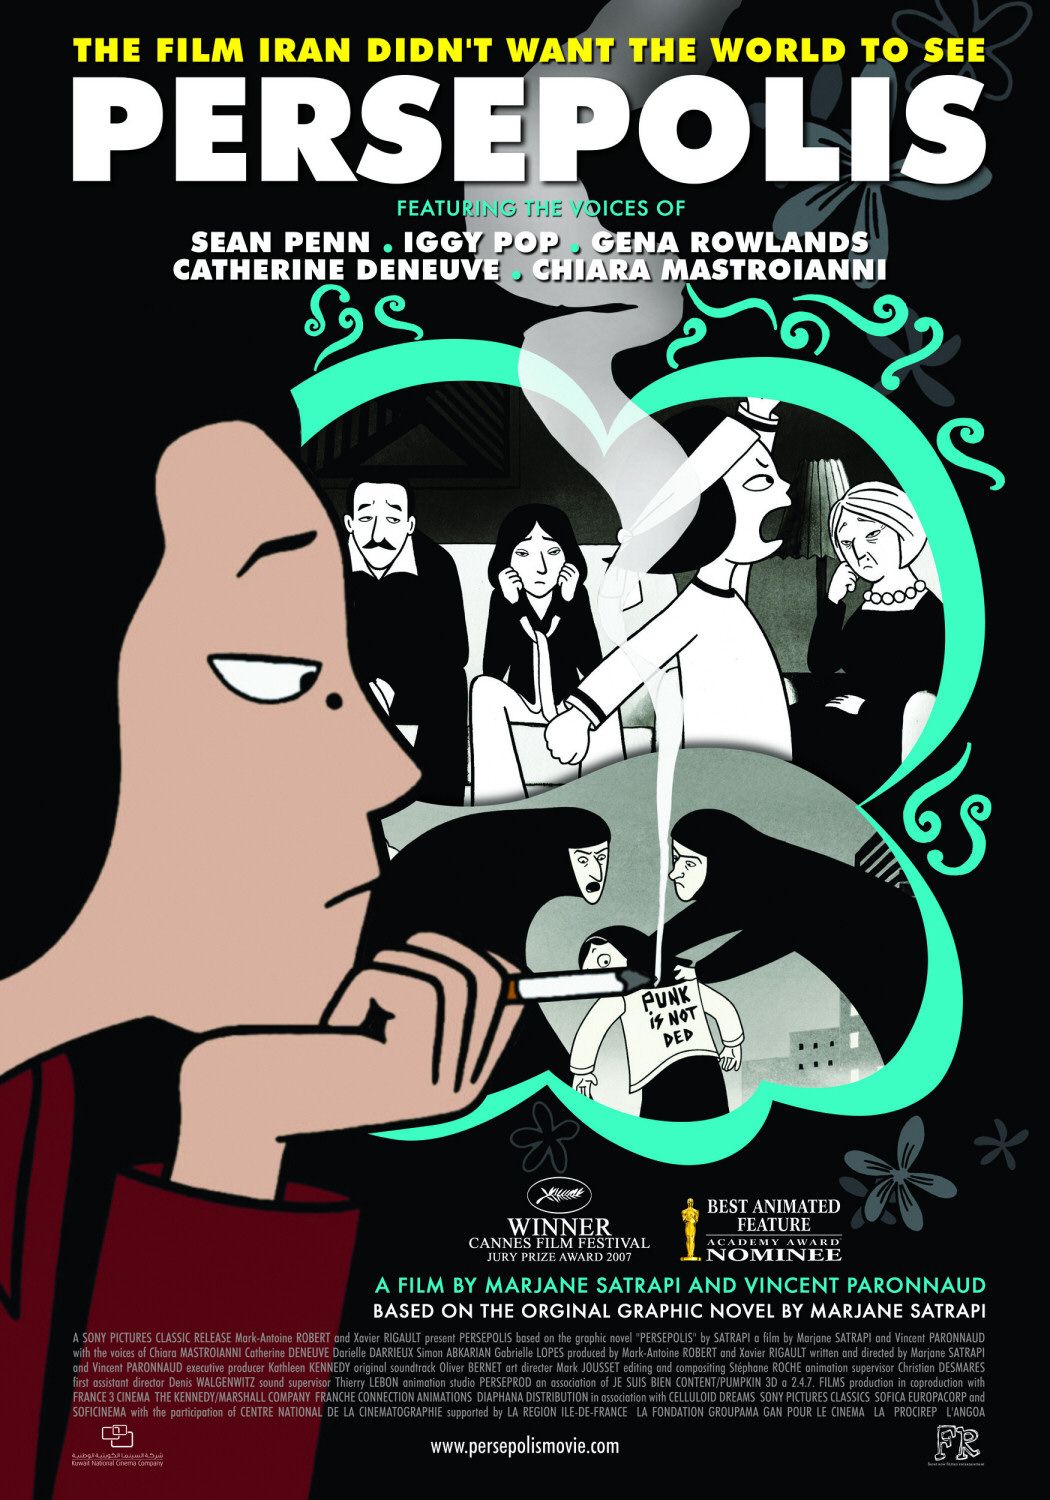 the complete persepolis online book